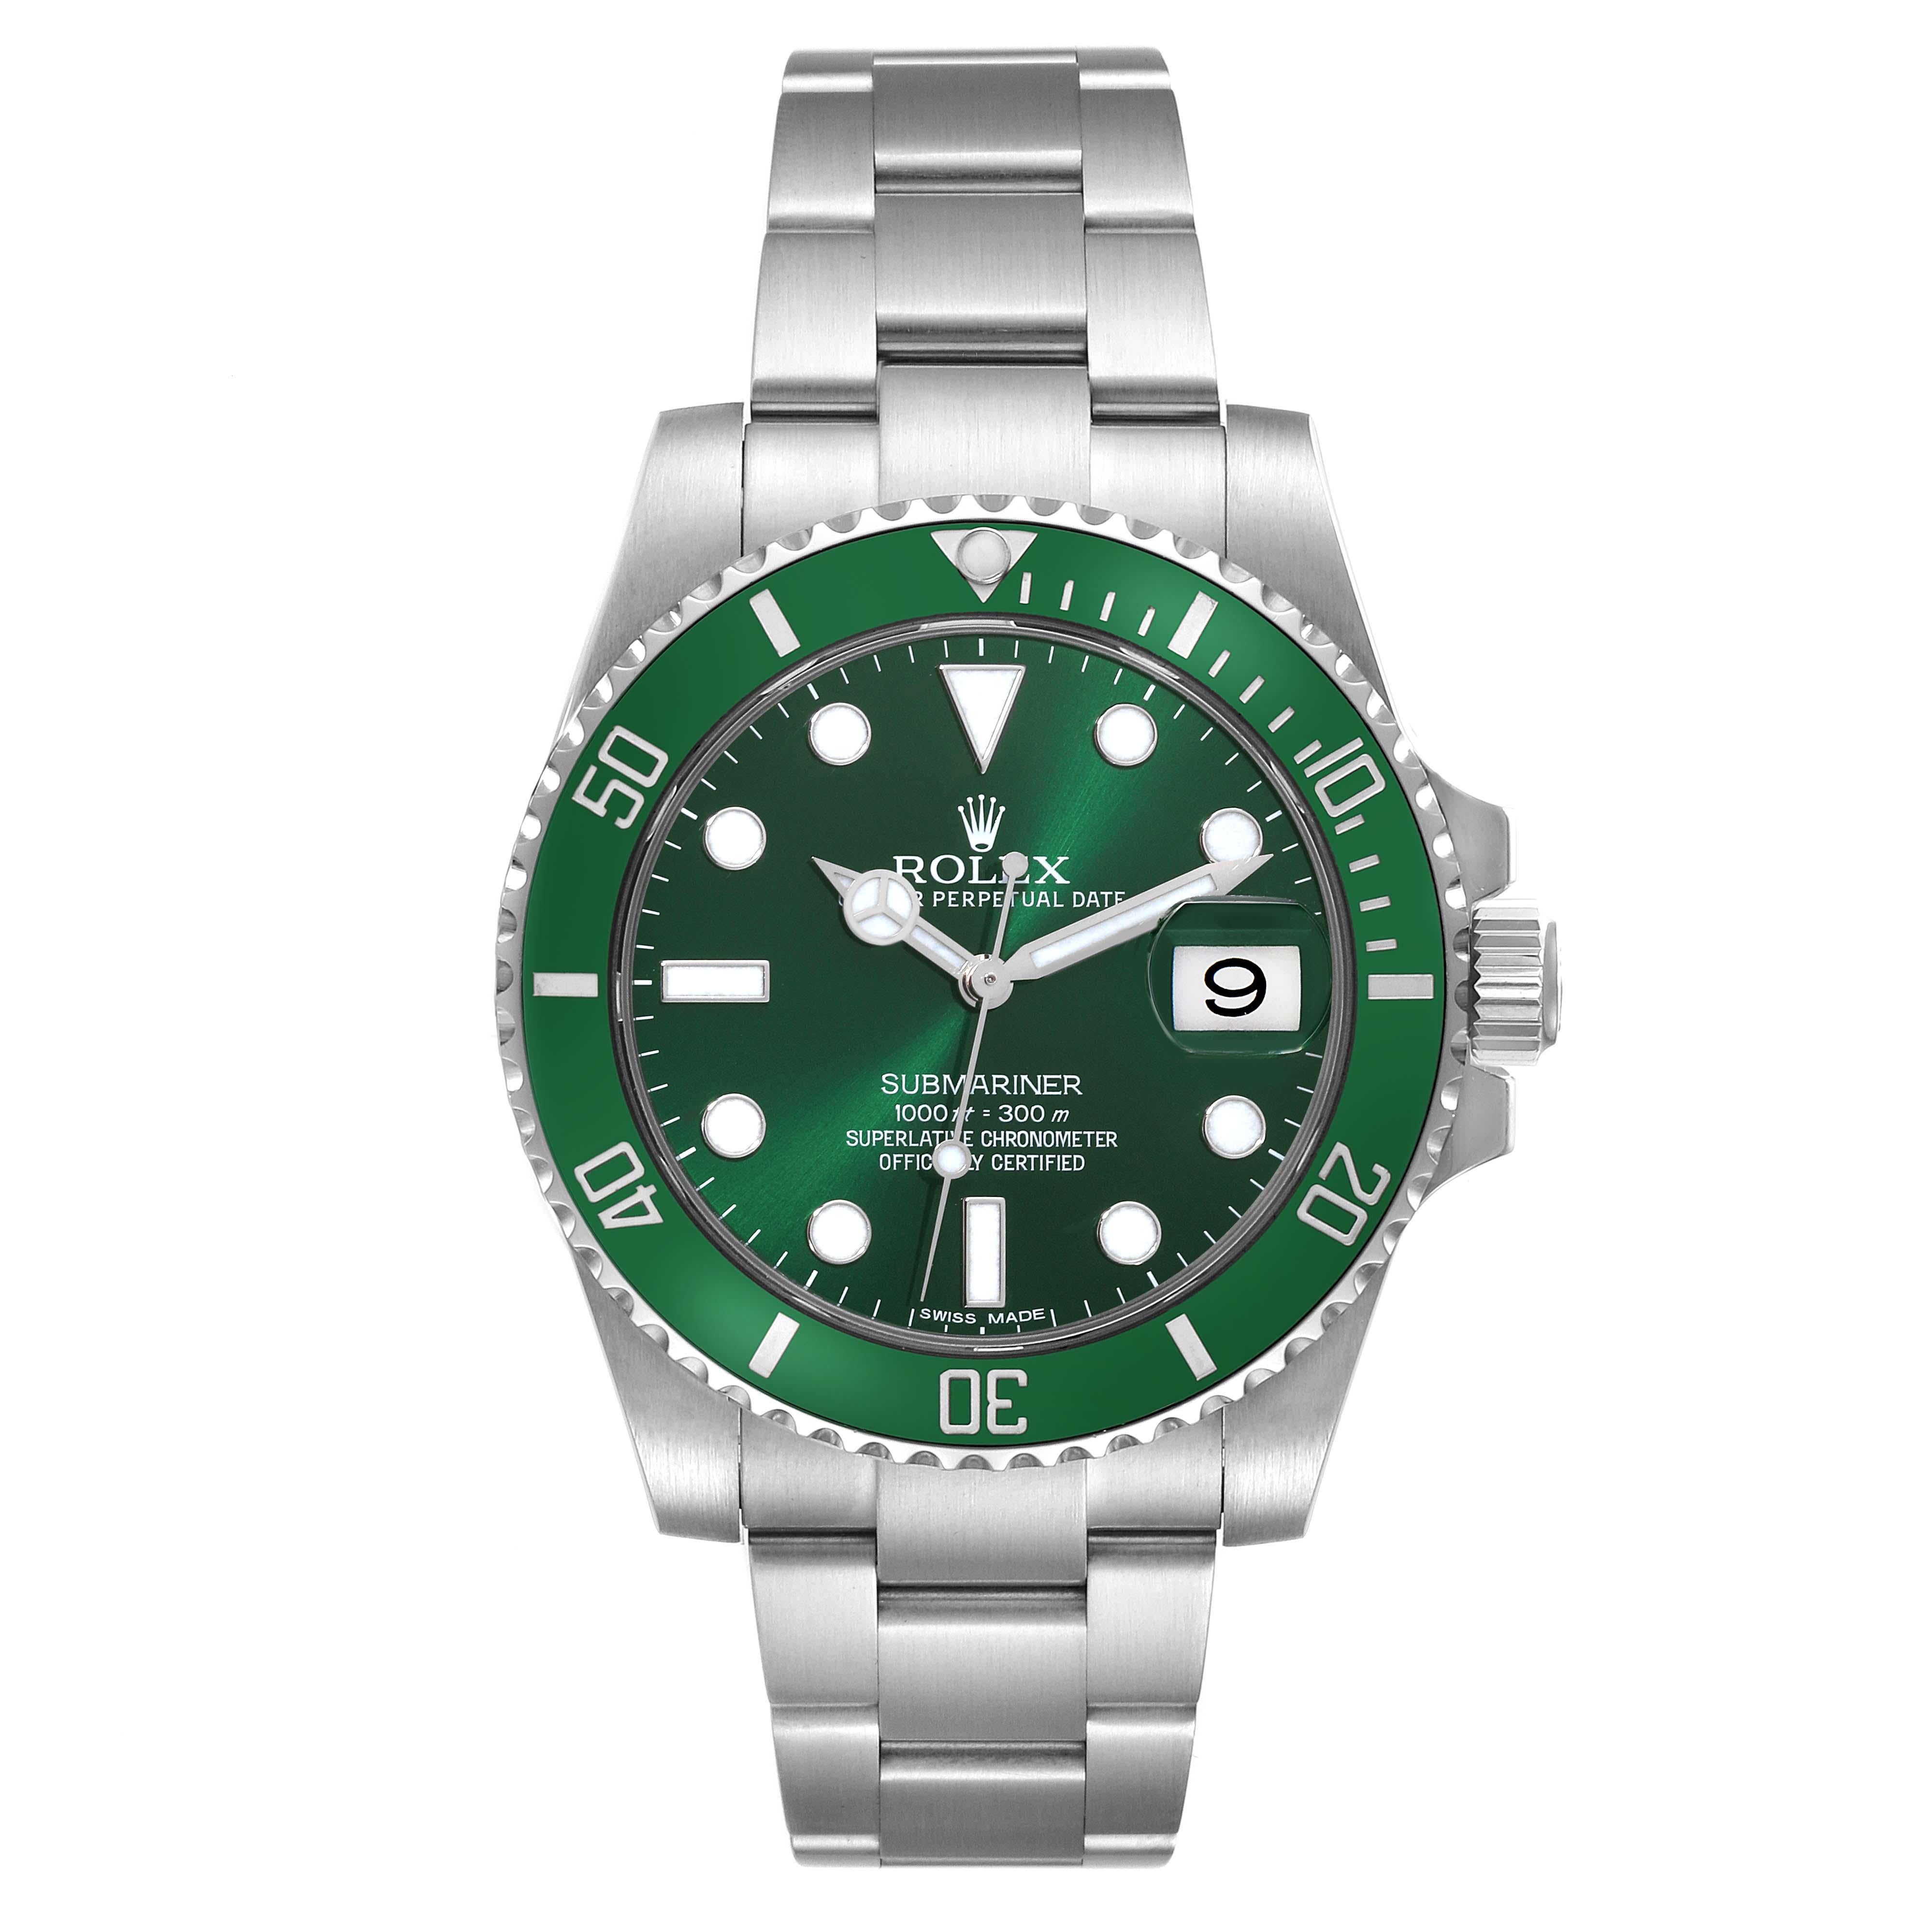 Rolex Submariner Hulk Green Dial Steel Mens Watch 116610LV. Officially certified chronometer automatic self-winding movement. Oyster case 40 mm in diameter. Rolex logo on the crown. Special time-lapse unidirectional rotating green ceramic bezel.